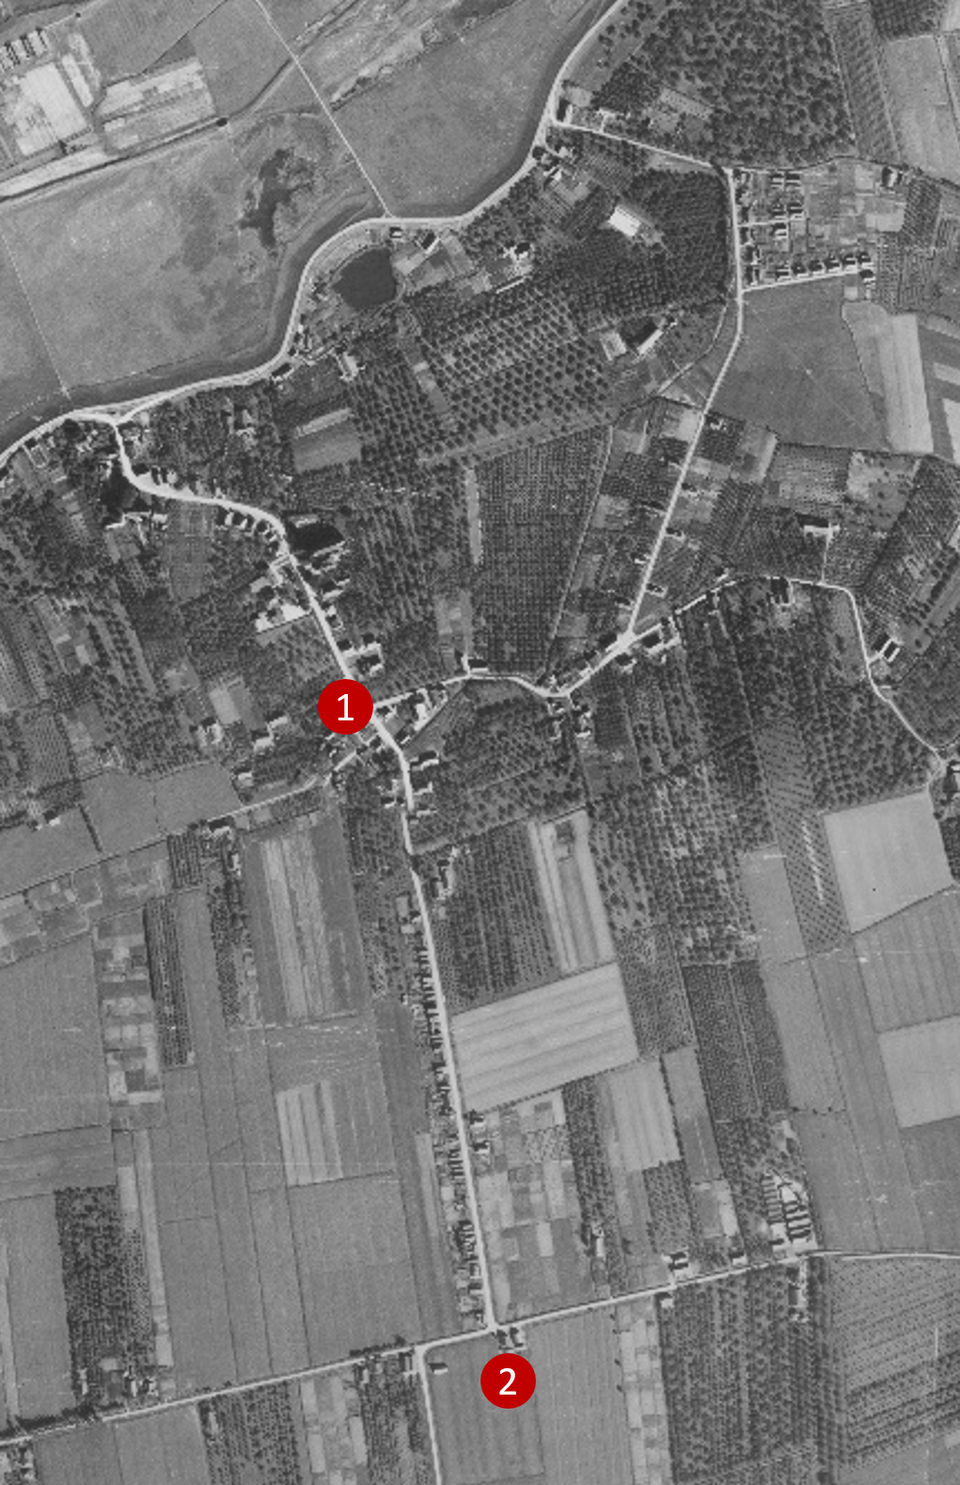 Aerial photo from 1944 showing the walking route (1) and the T-junction Dorpstraat - Honingveldsestraat (2).